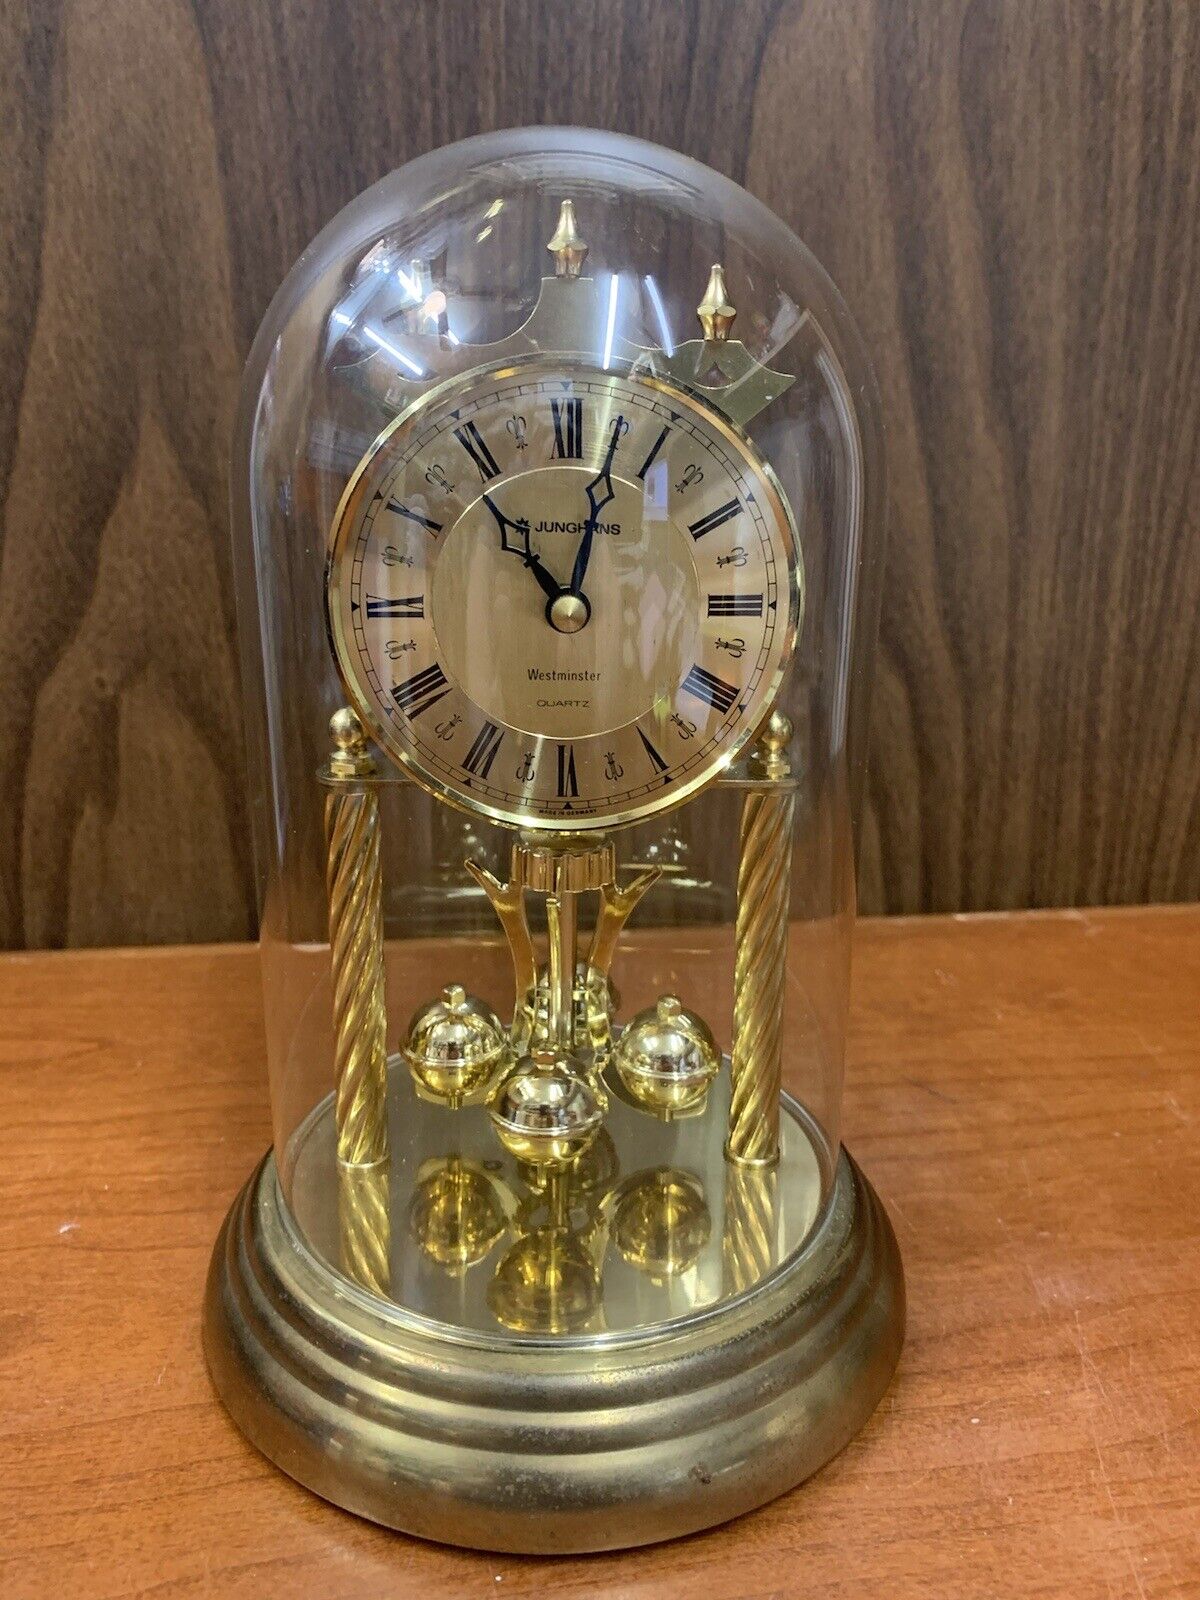 JUNGHANS VINTAGE GLASS DOME CLOCK MADE IN GERMANY. Chimes